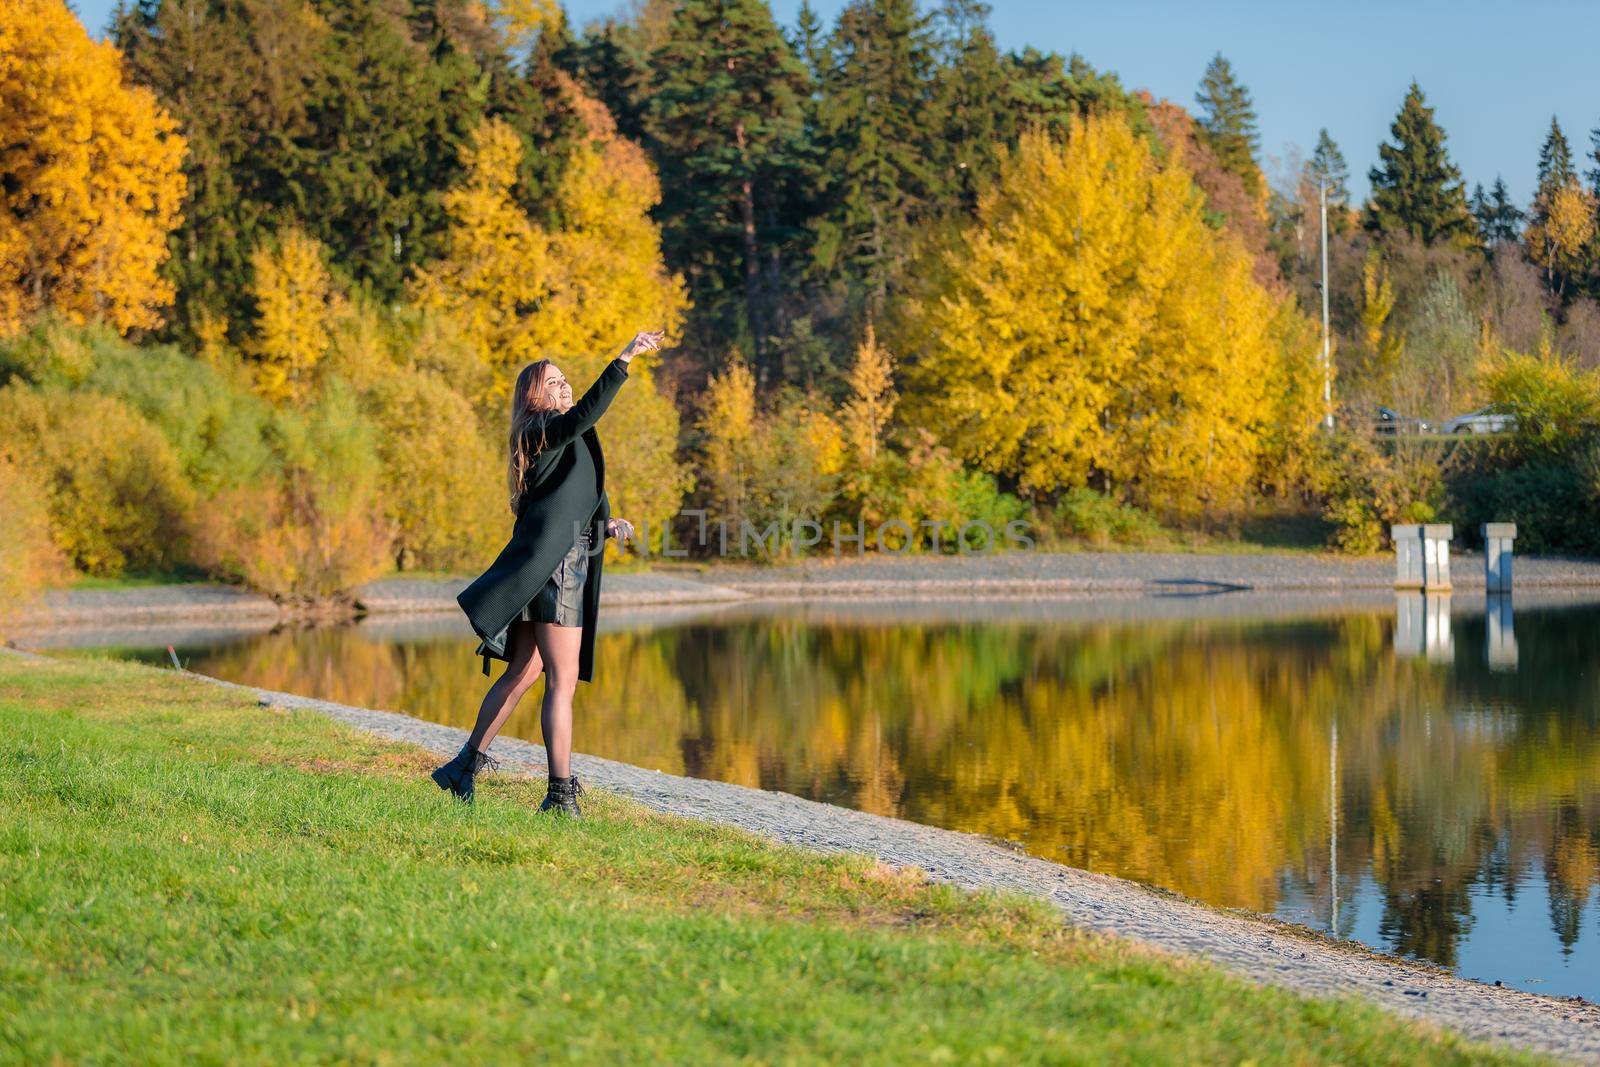 A woman with long hair walks in an autumn park by a pond and throws stones into the water. Autumn season.